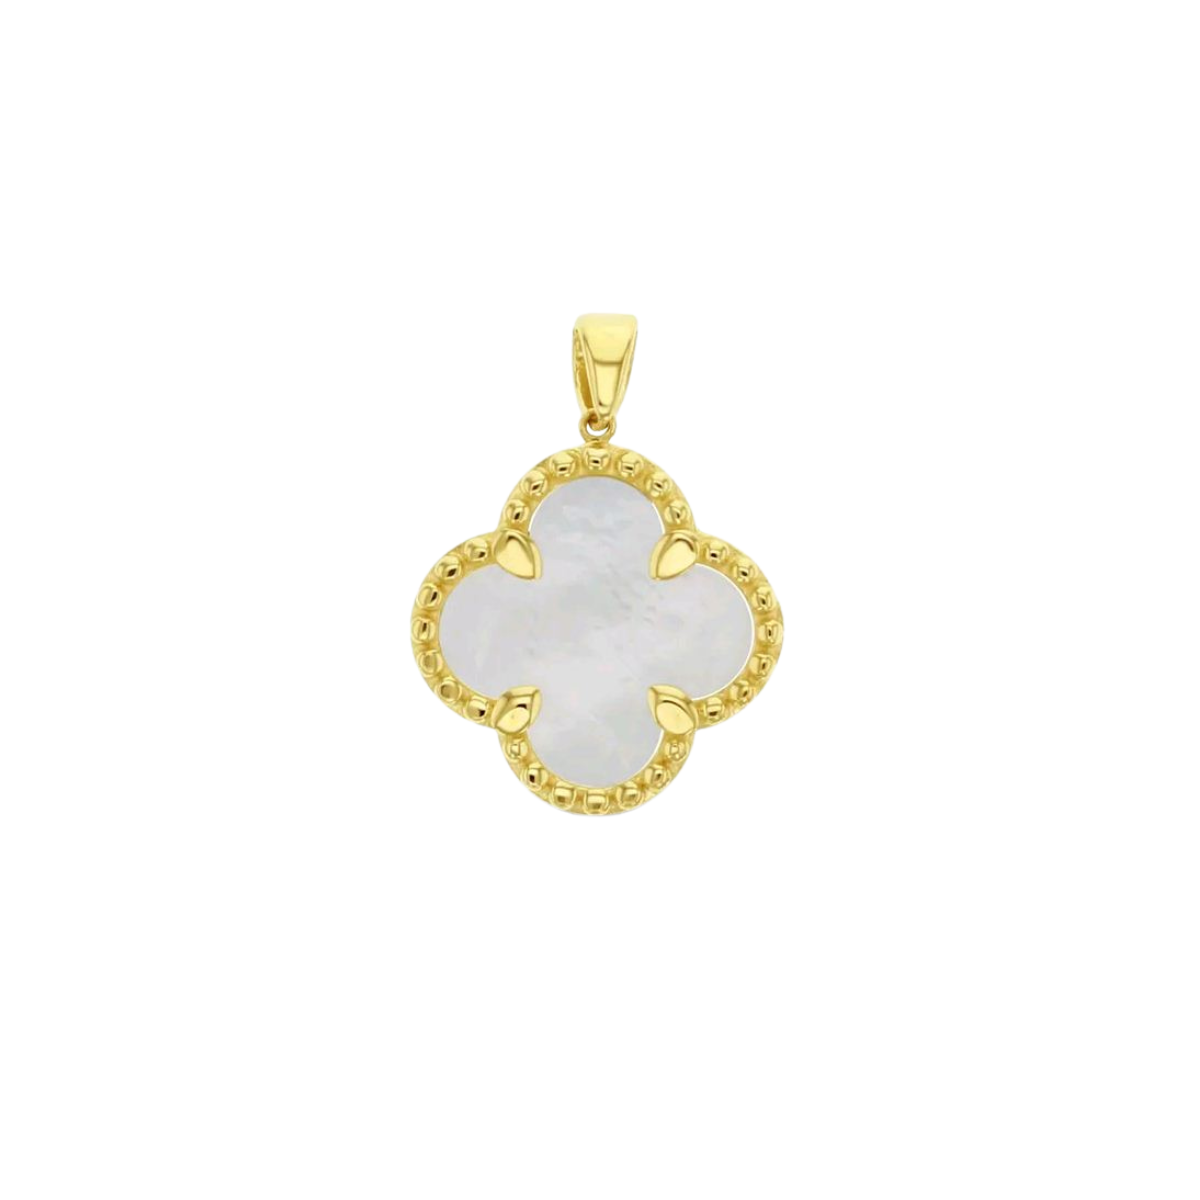 9 Carat Yellow Gold Mother of Pearl 4 Leaf Clover Pendant (16.2mm Wide, 22.4mm Drop)